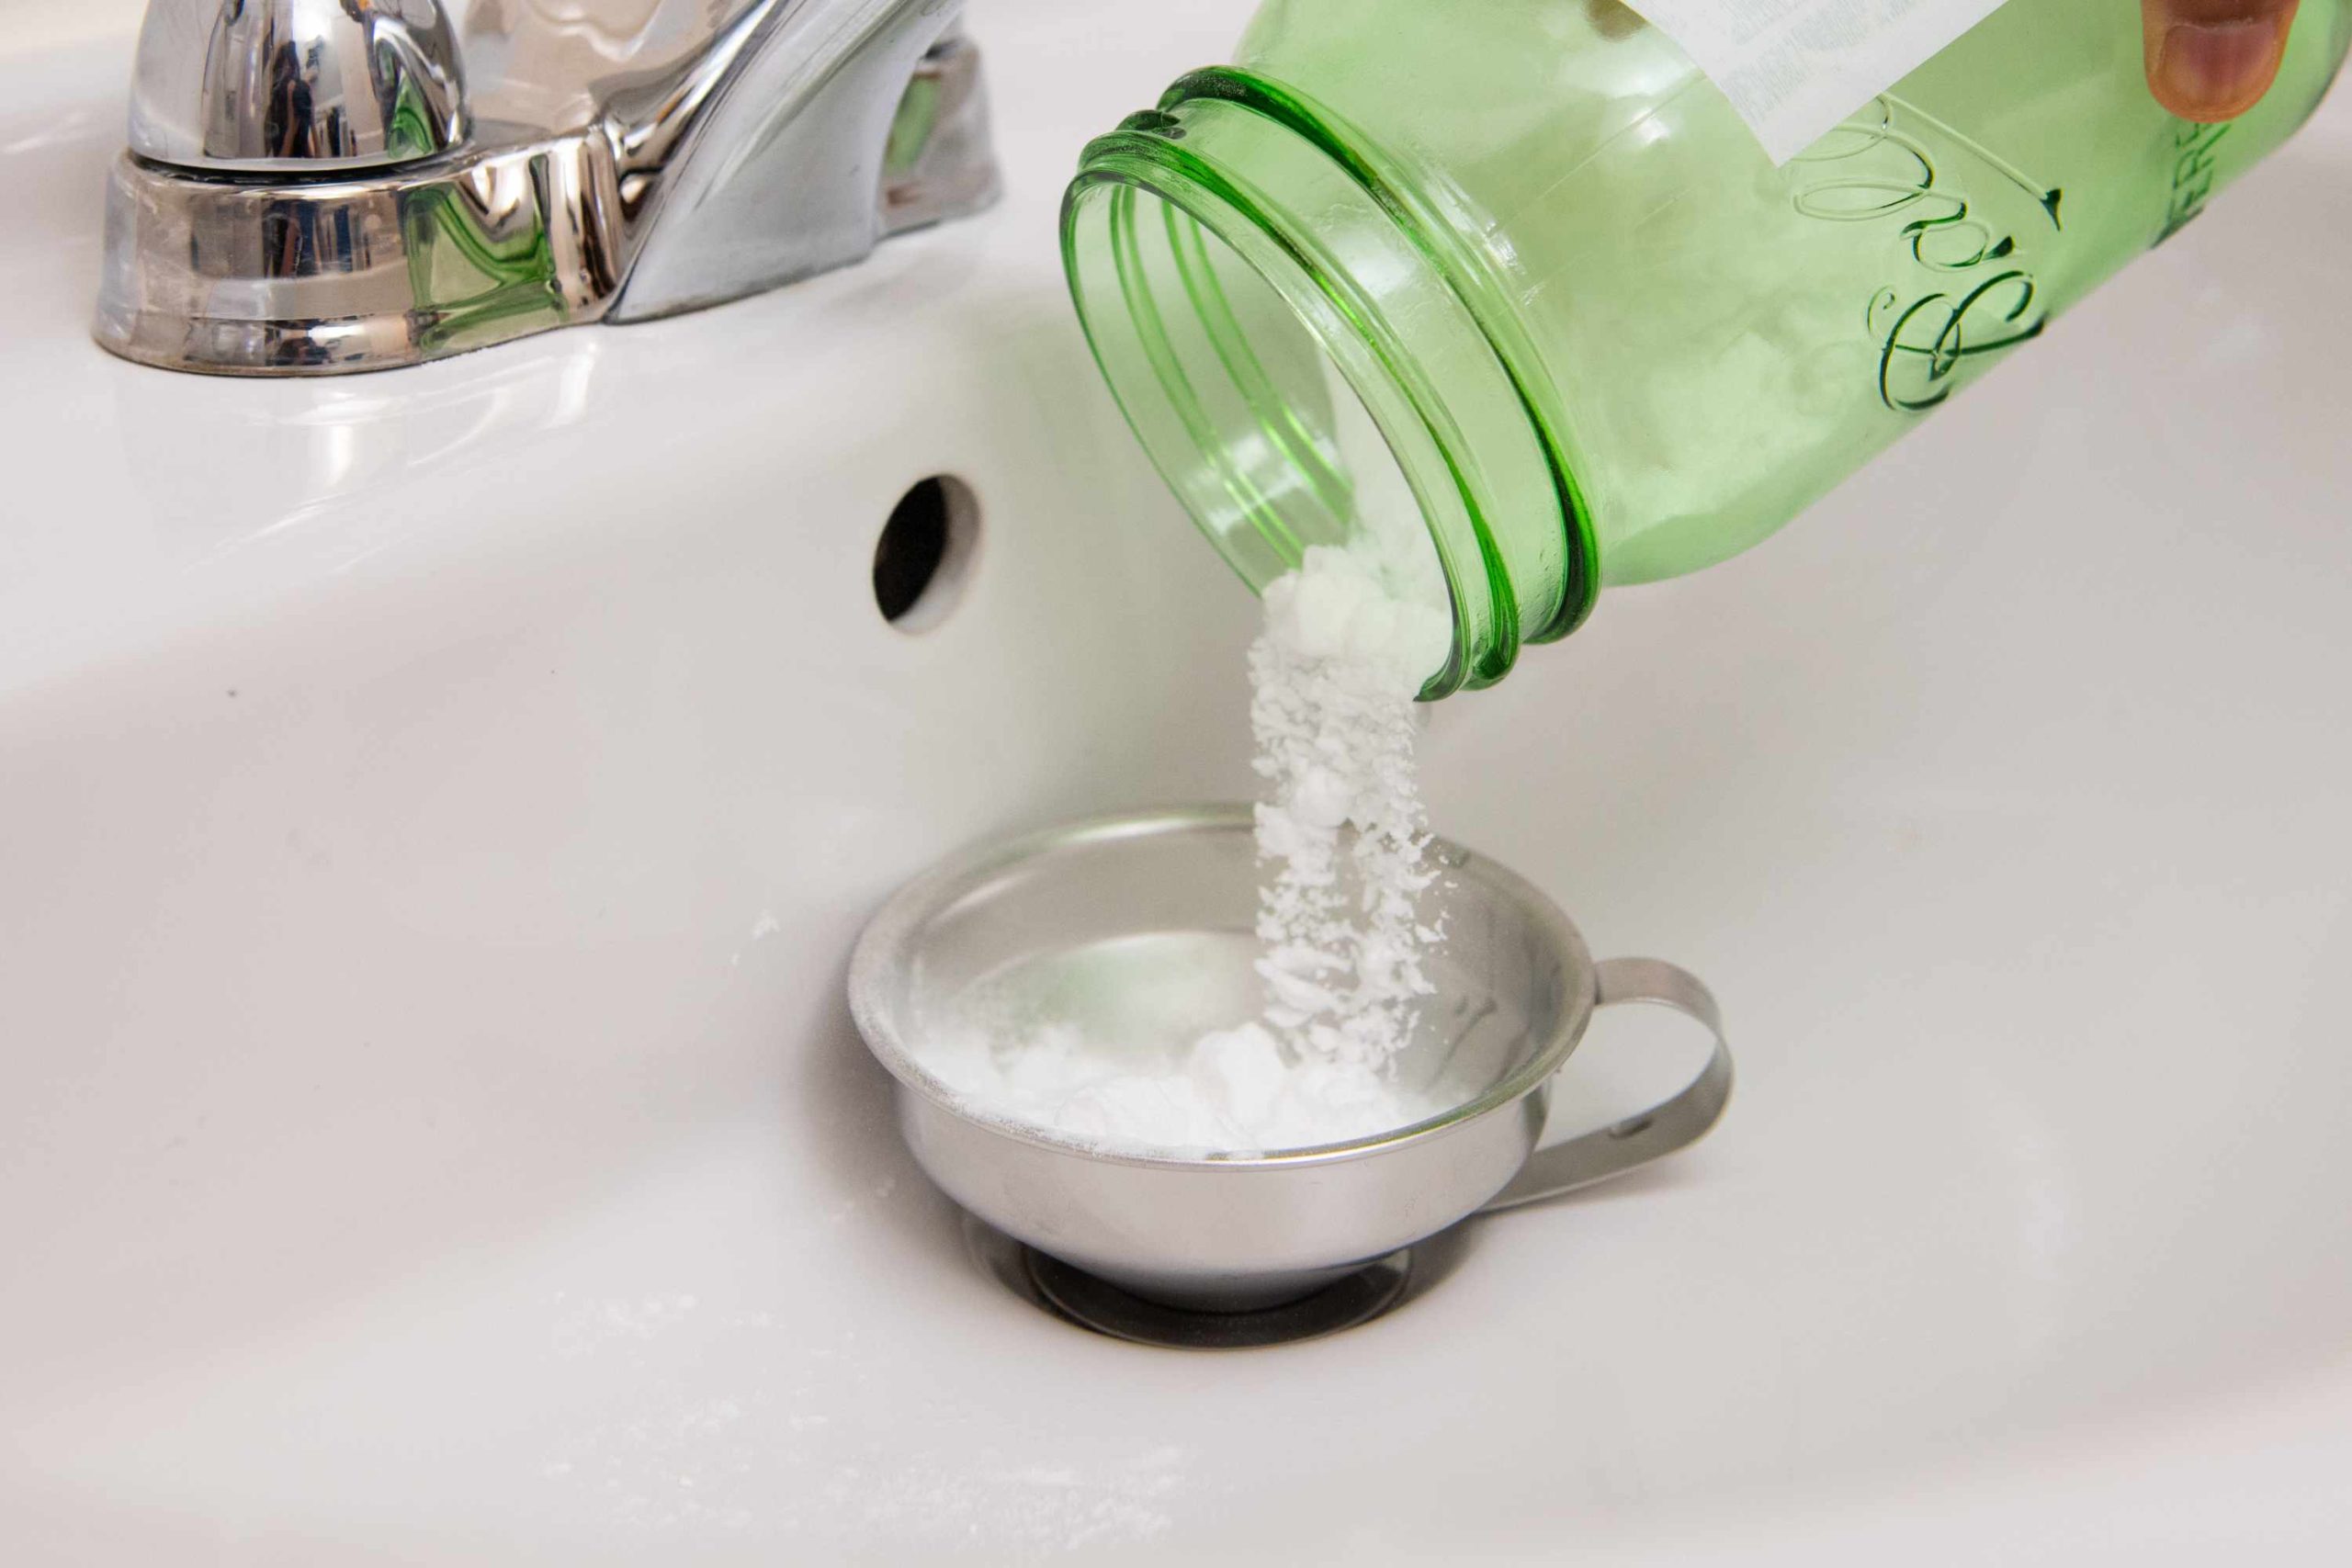 How To Clean Kitchen Sink With Baking Soda